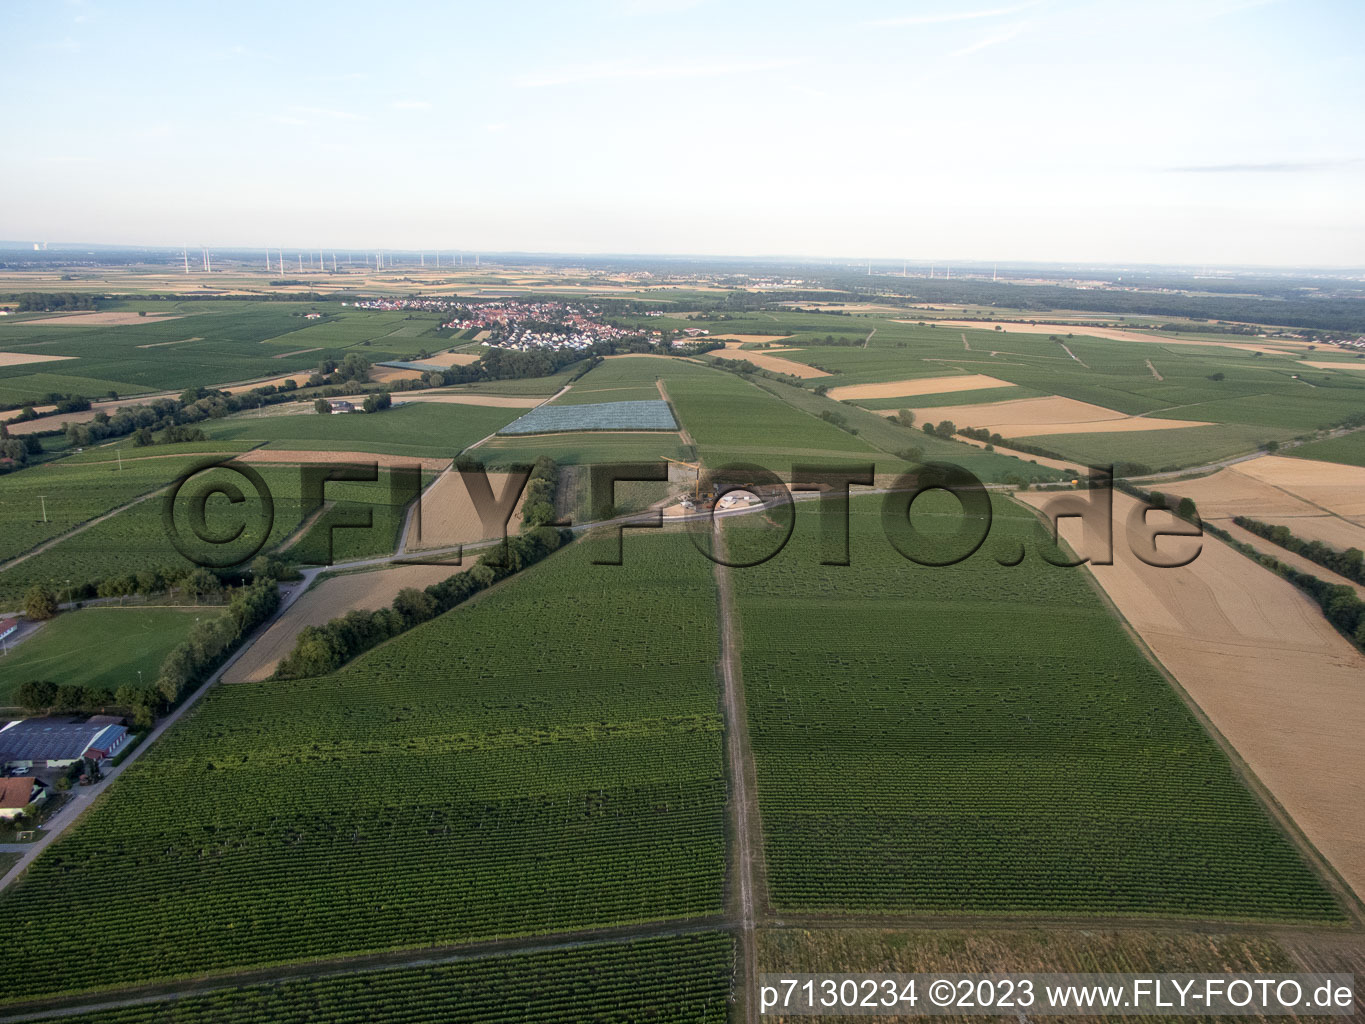 Impflingen in the state Rhineland-Palatinate, Germany seen from a drone